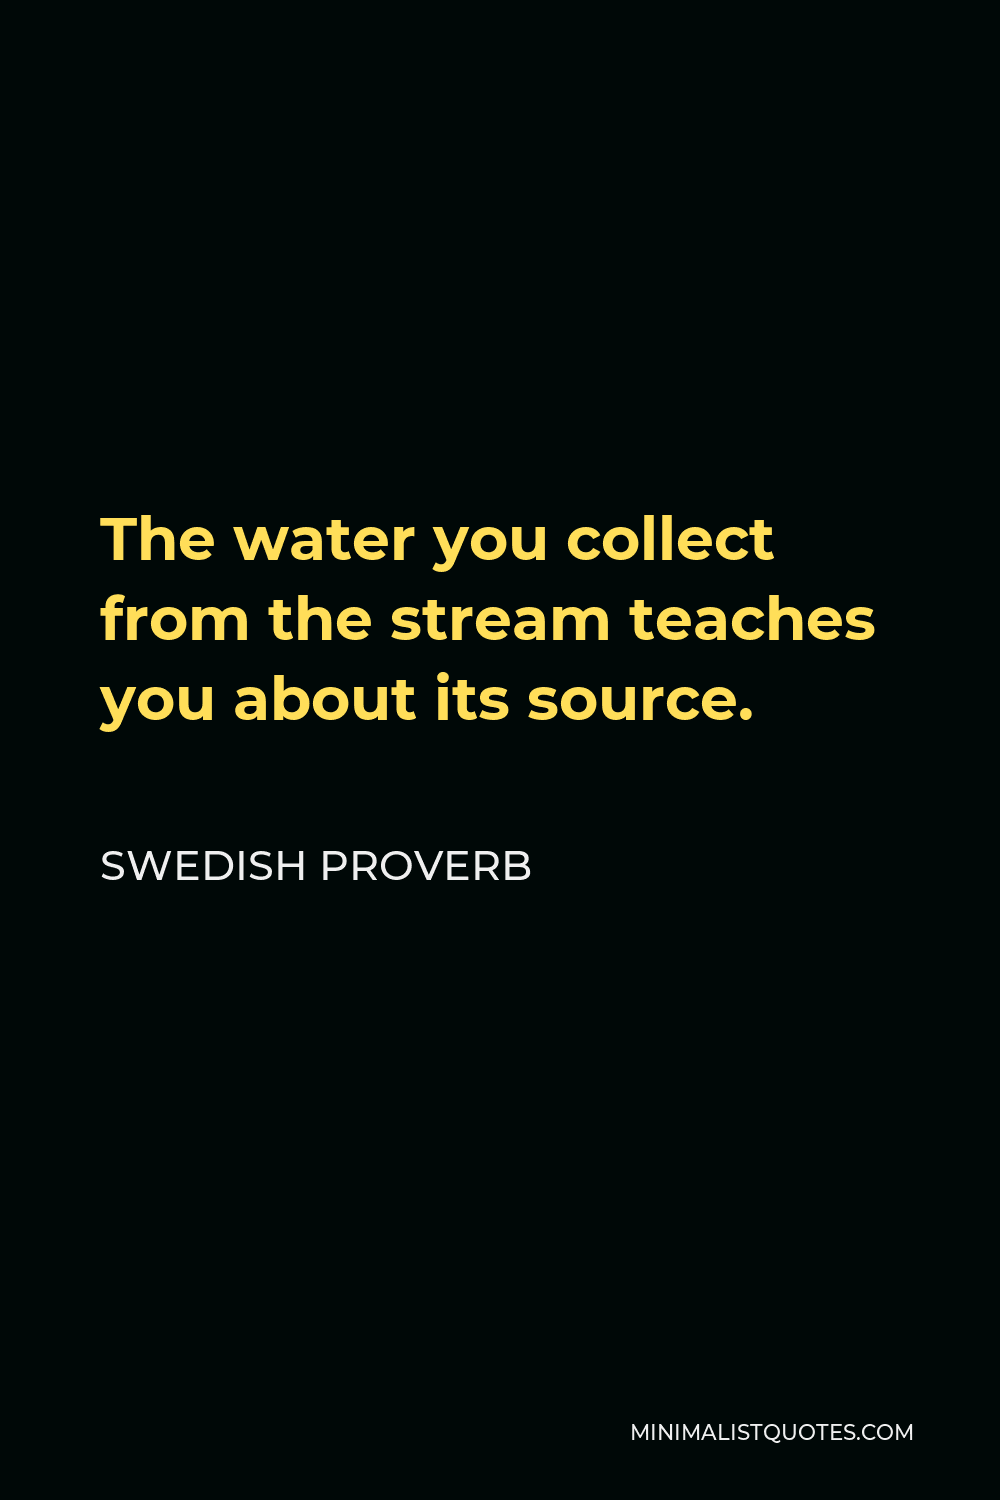 Swedish Proverb Quote - The water you collect from the stream teaches you about its source.